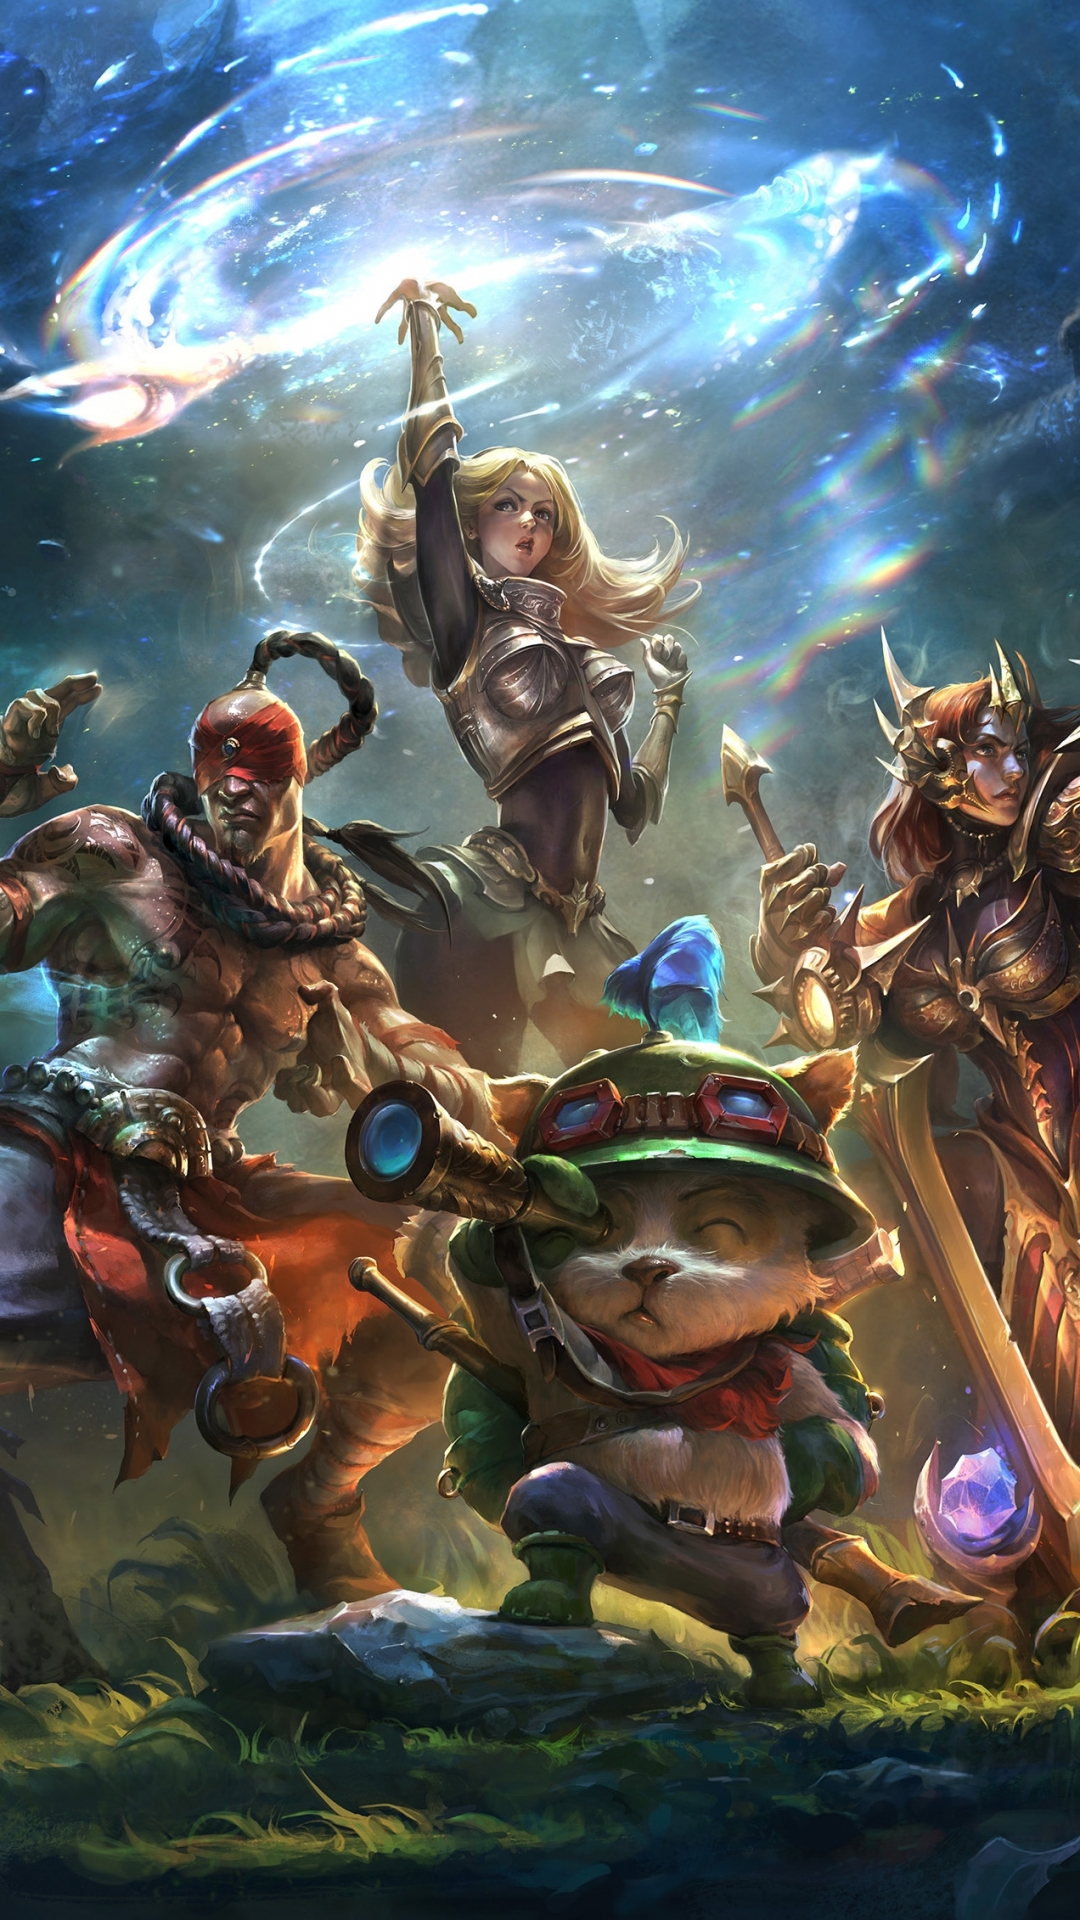 The Best League of Legends Phone Backgrounds